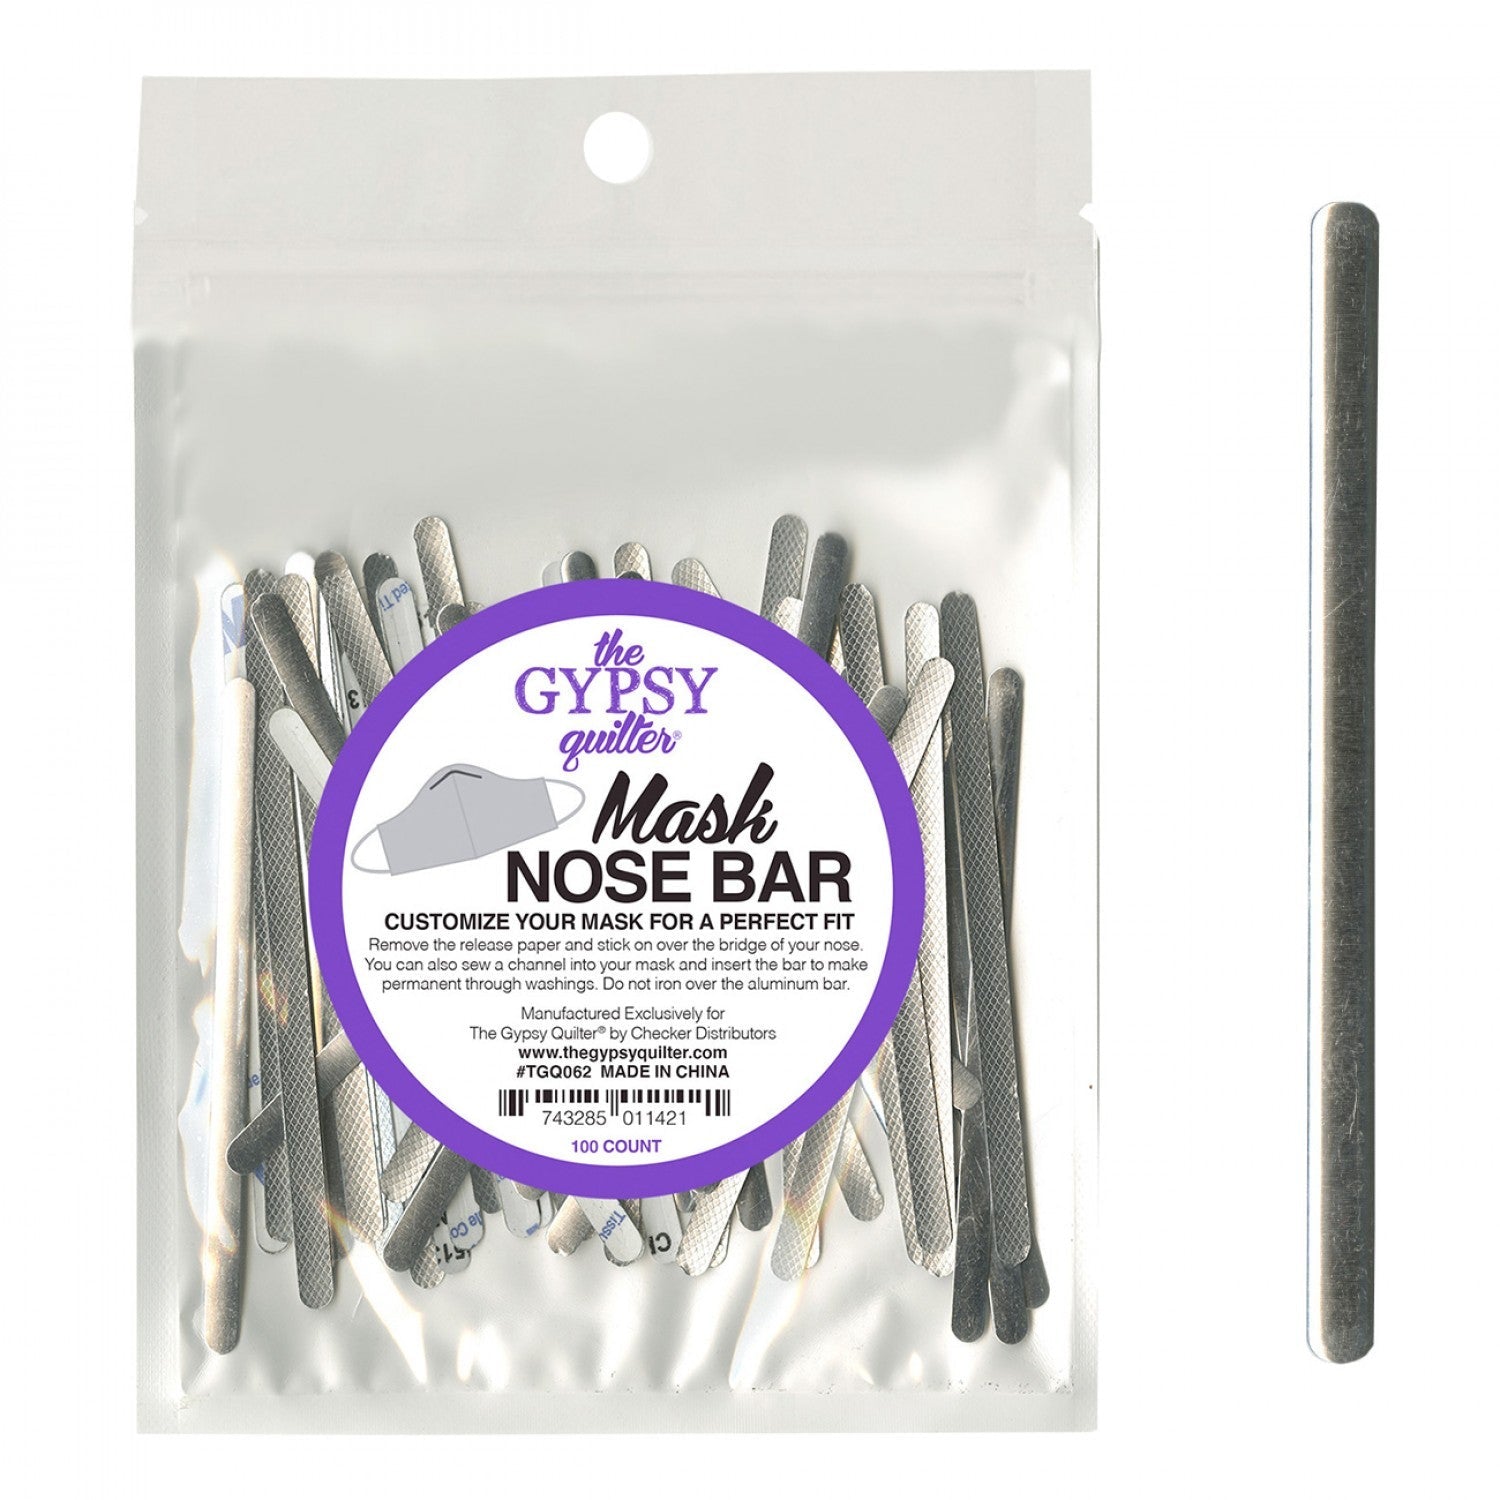 Gypsy Quilter The Mask Nose Bar 100 Count